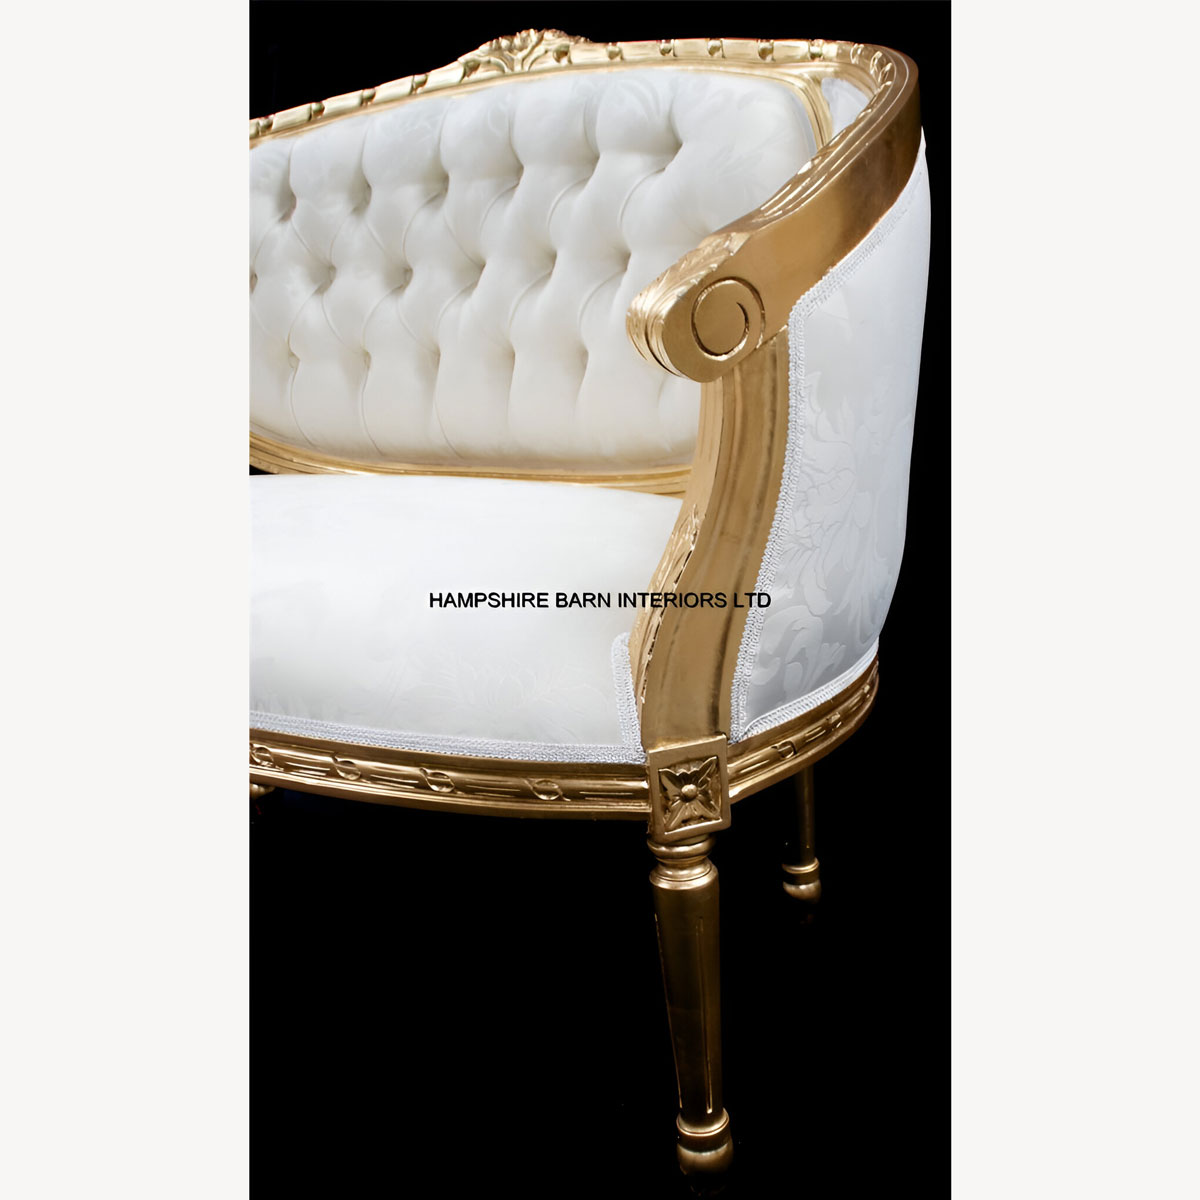 Double Ended Gold Ivory French Louis Ornate Chaise Longue Sofa Home Salon 5 - Hampshire Barn Interiors - Double Ended Gold Ivory French Louis Ornate Chaise Longue Sofa Home Salon -